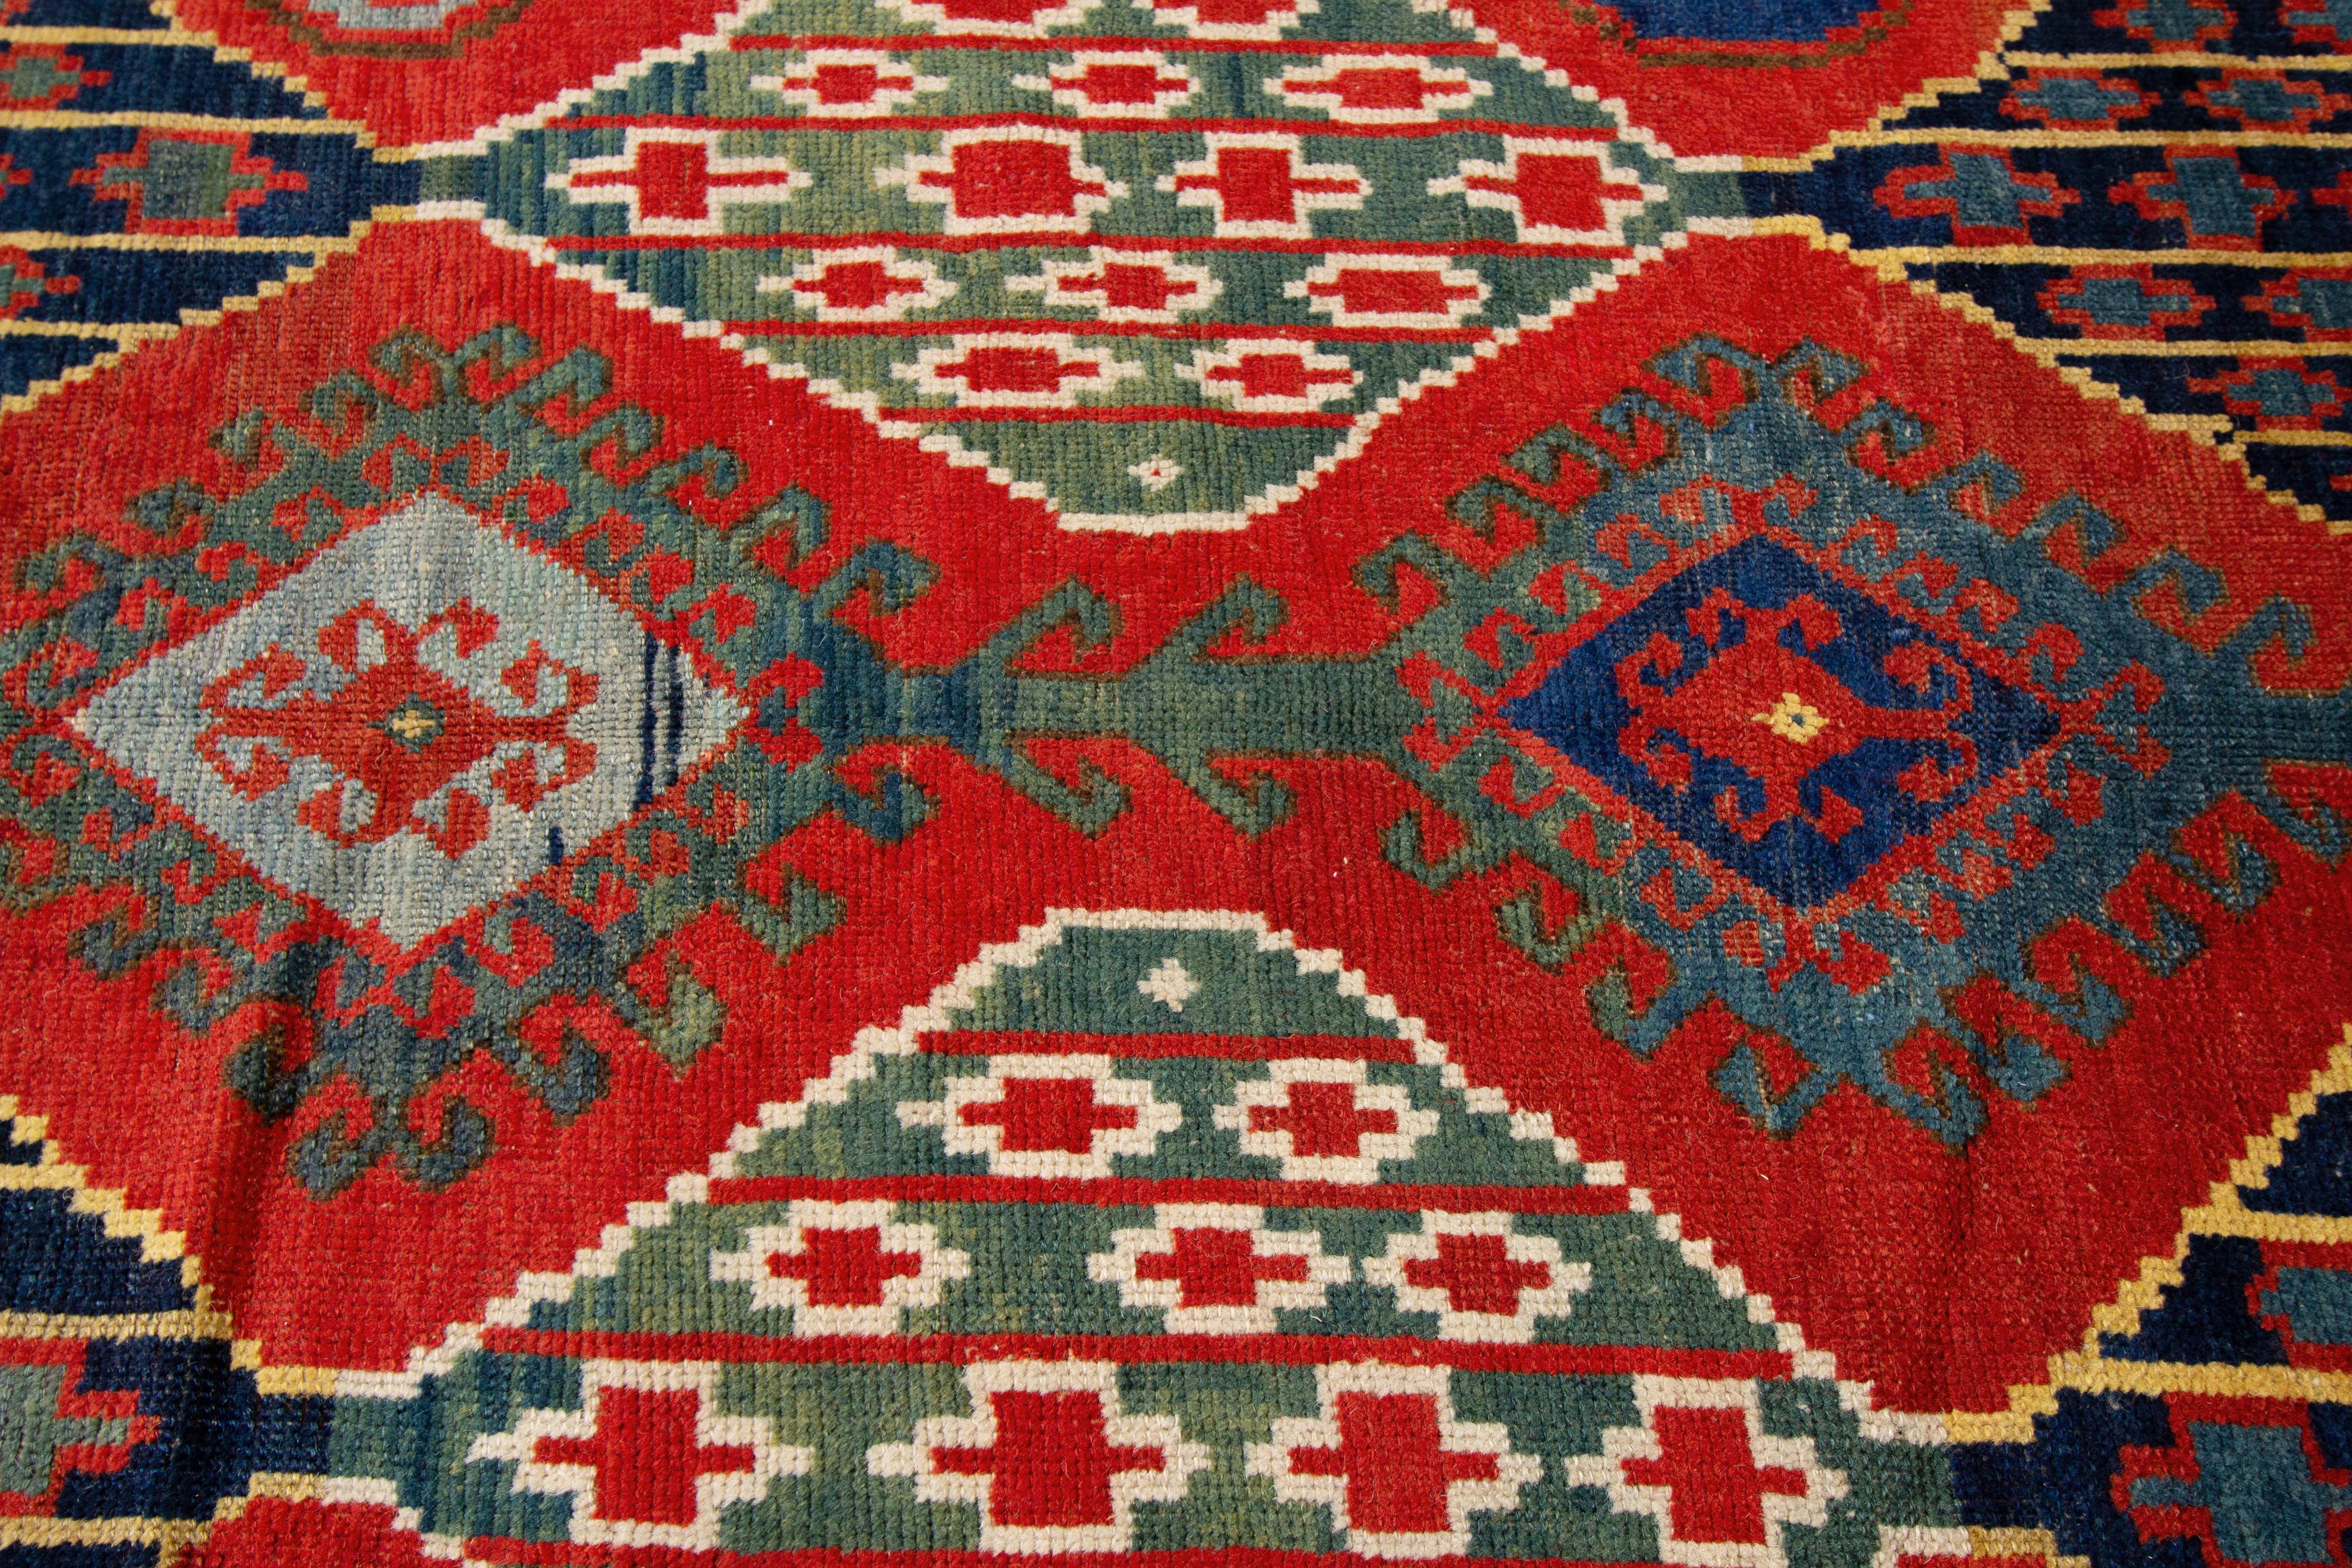 Late 19th Century Red, Blue Kazakh Rug In Excellent Condition For Sale In Norwalk, CT